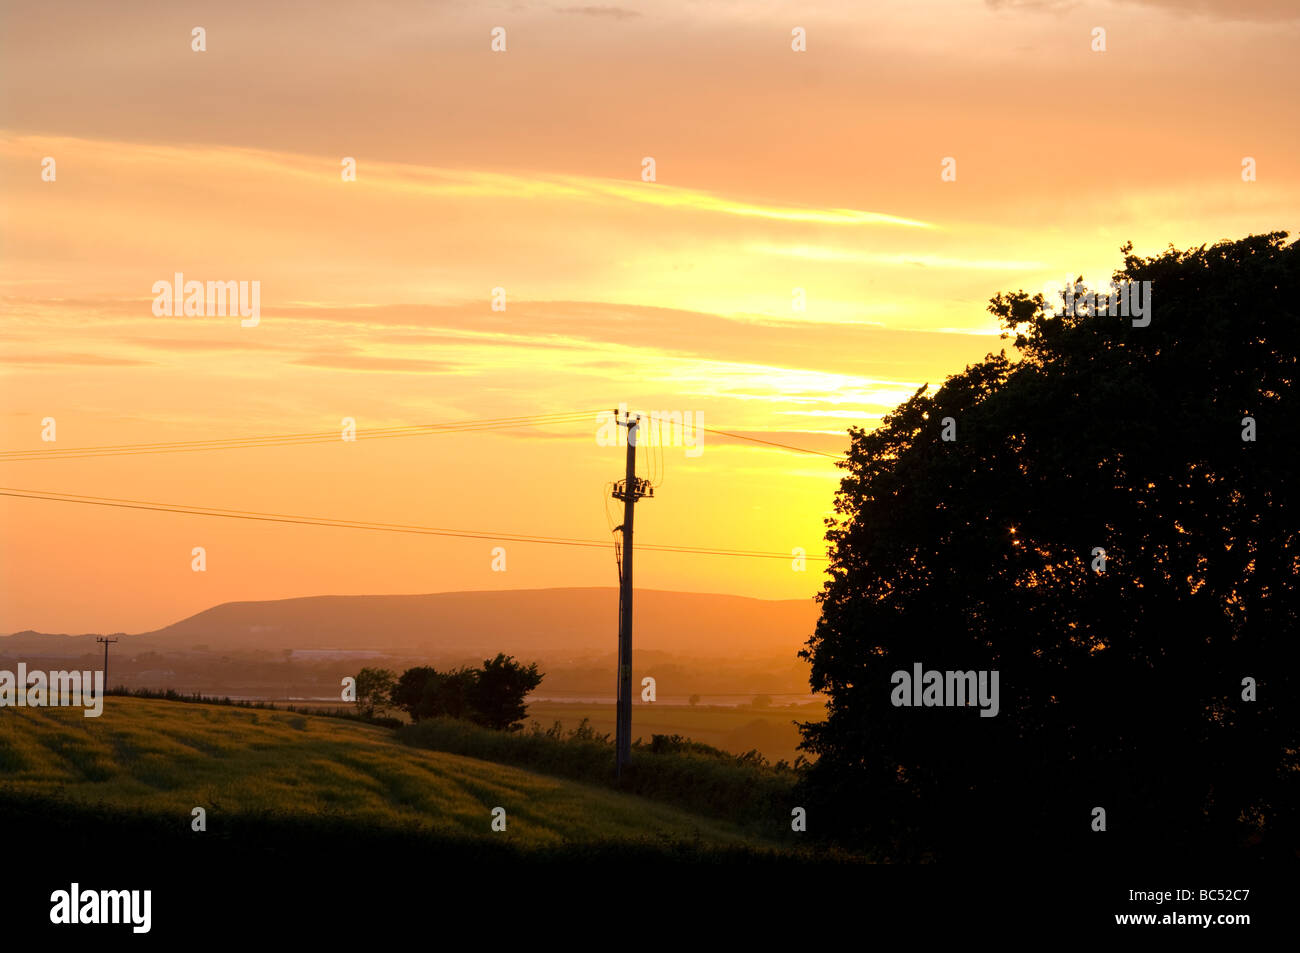 A View Over The Rolling Hills Of North Devon at Sunset from Bickington England Stock Photo